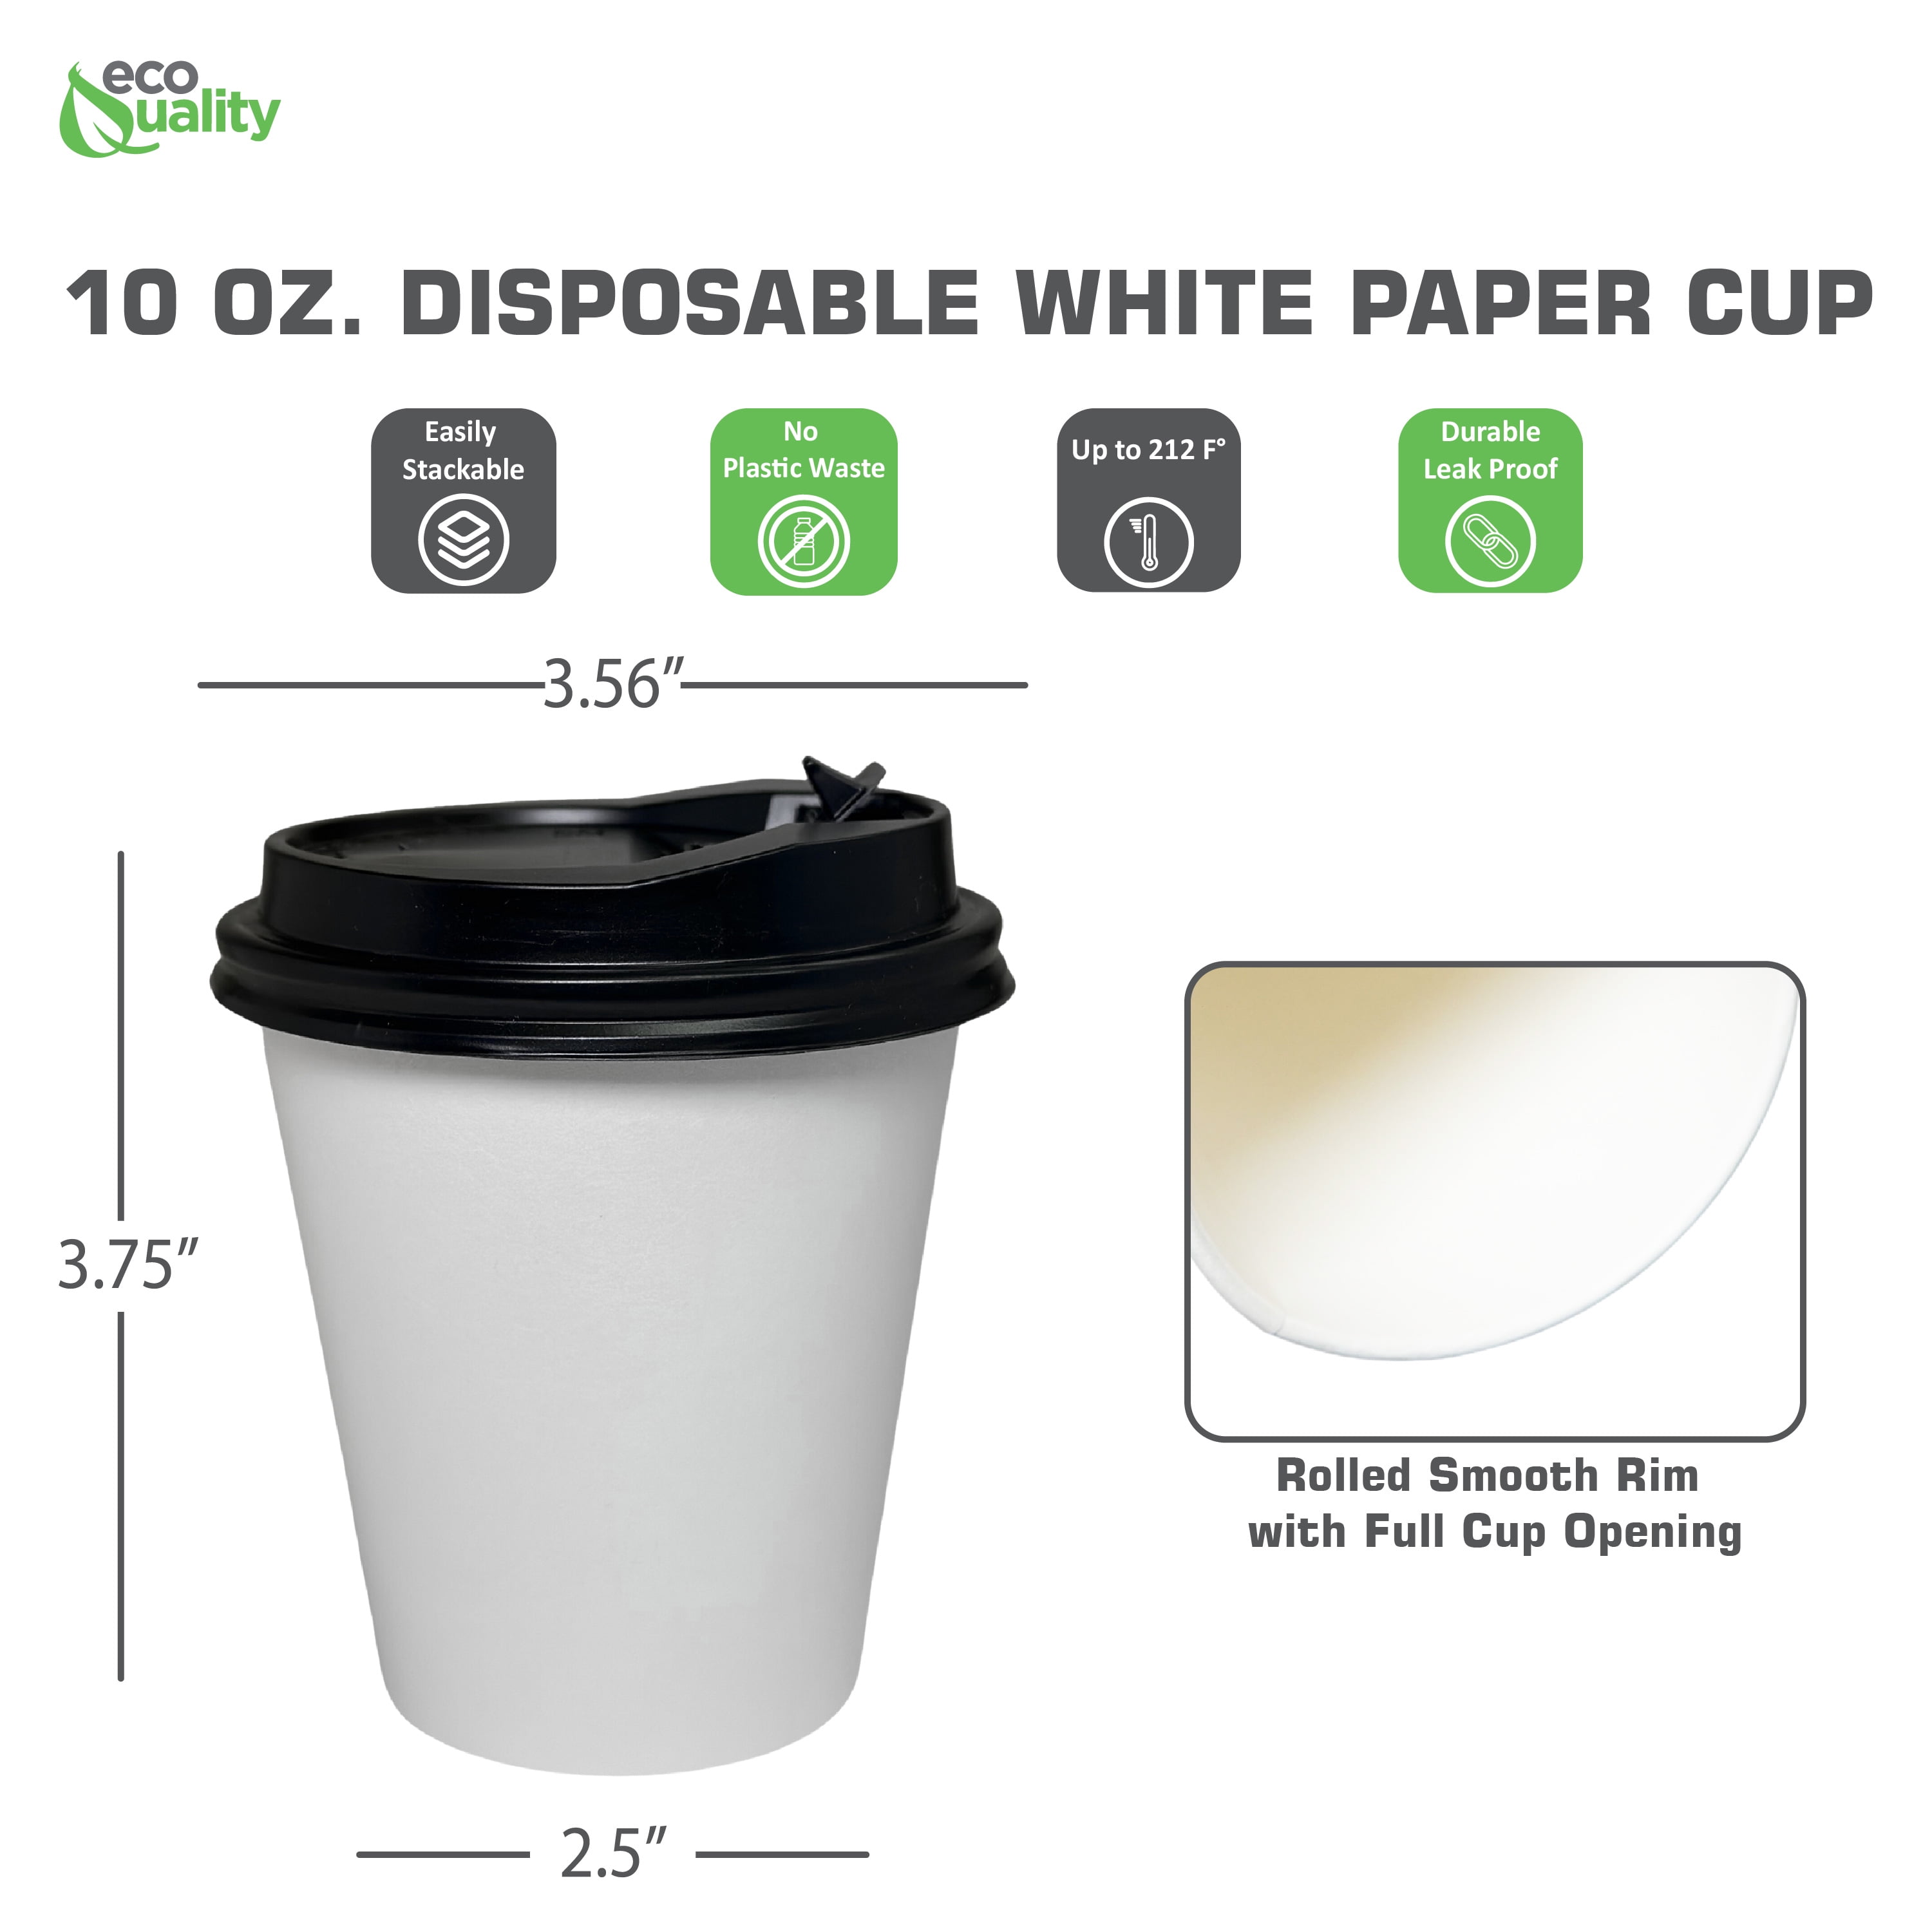 Galashield Insulated Disposable Coffee Cups with Lids [50 Sets] 10 oz Corrugated Ripple to Go Paper Hot Beverage Cups - Black